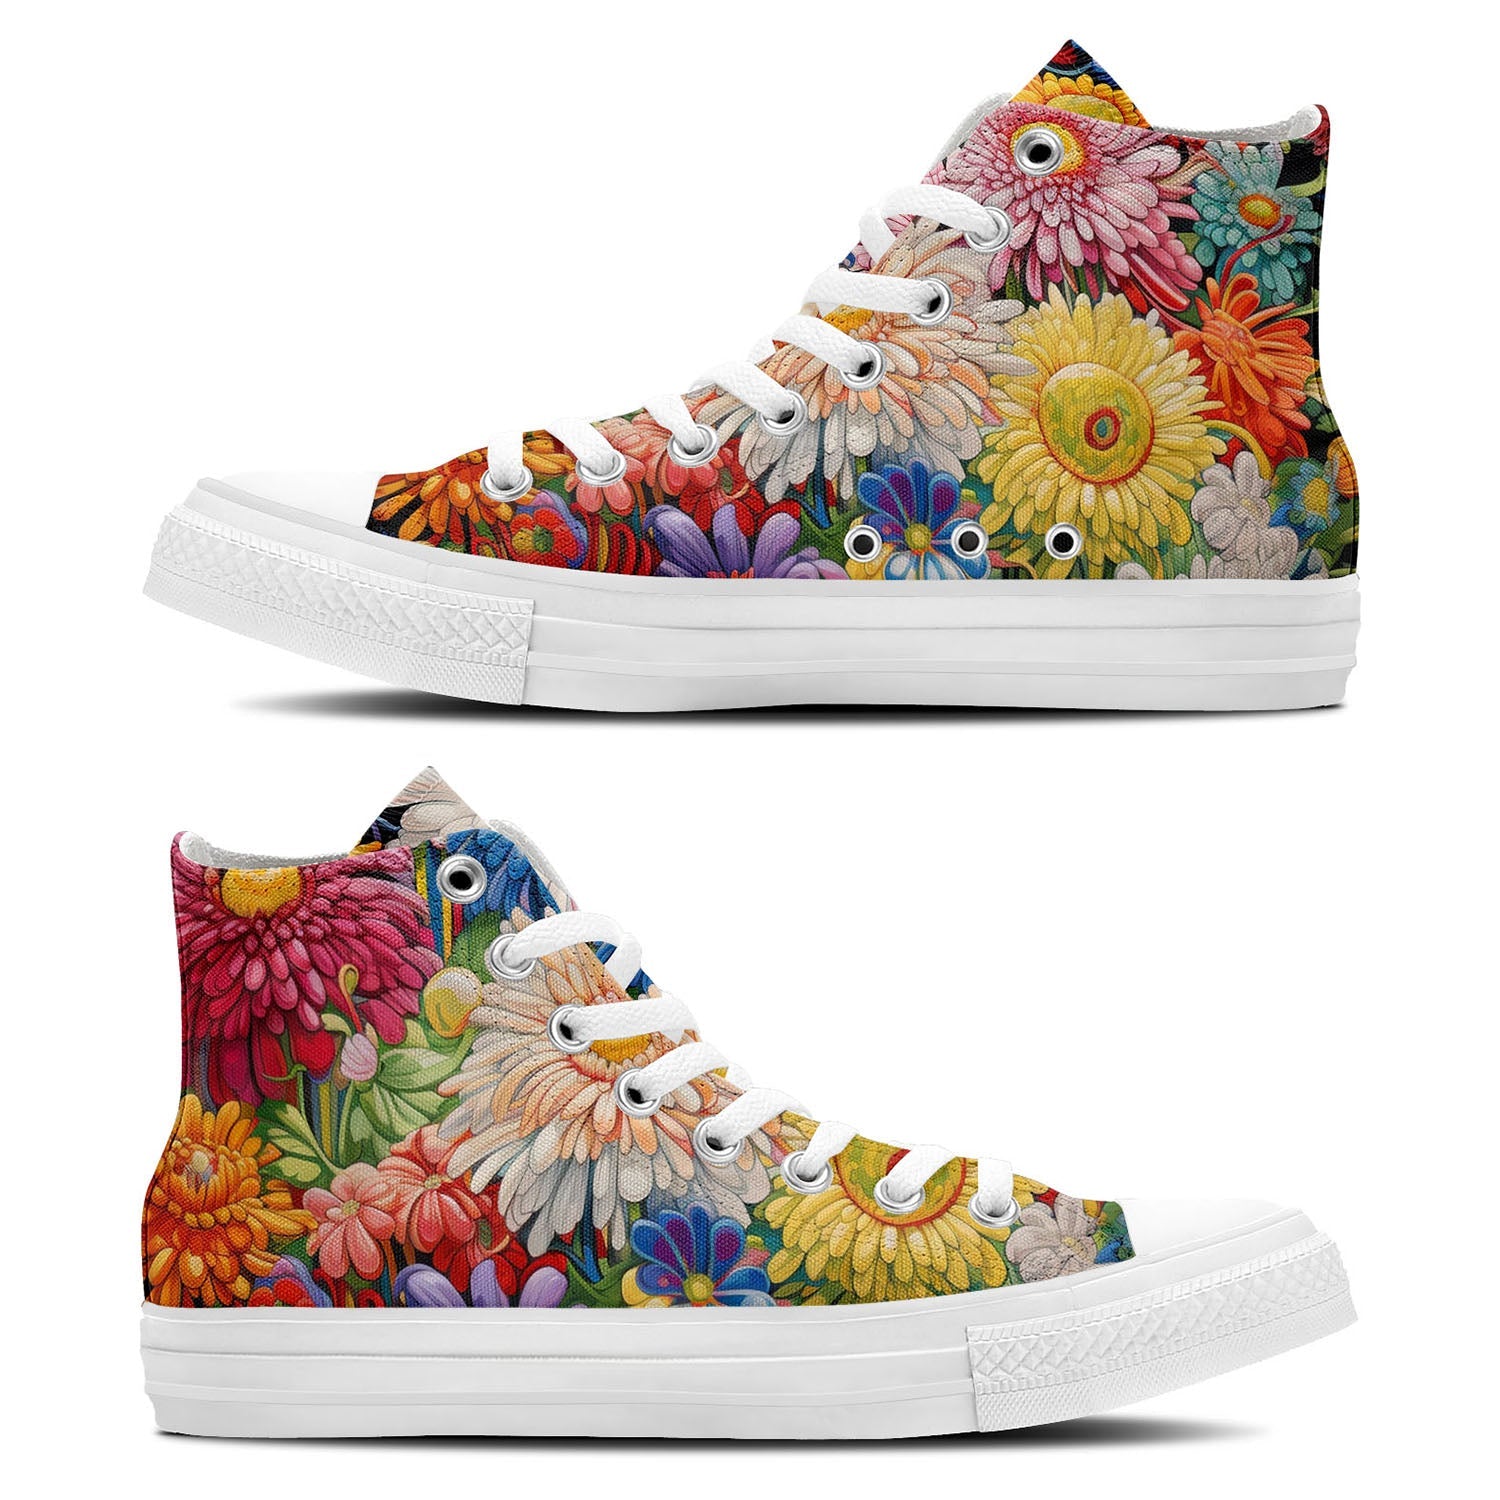 Blooms Elegance: Men and Women's Mid-Top Canvas Shoes - Elevate Your Style with Central-High Canvas Shoes Featuring the Playful Elegance of Artistic Chrysanthemum Designs